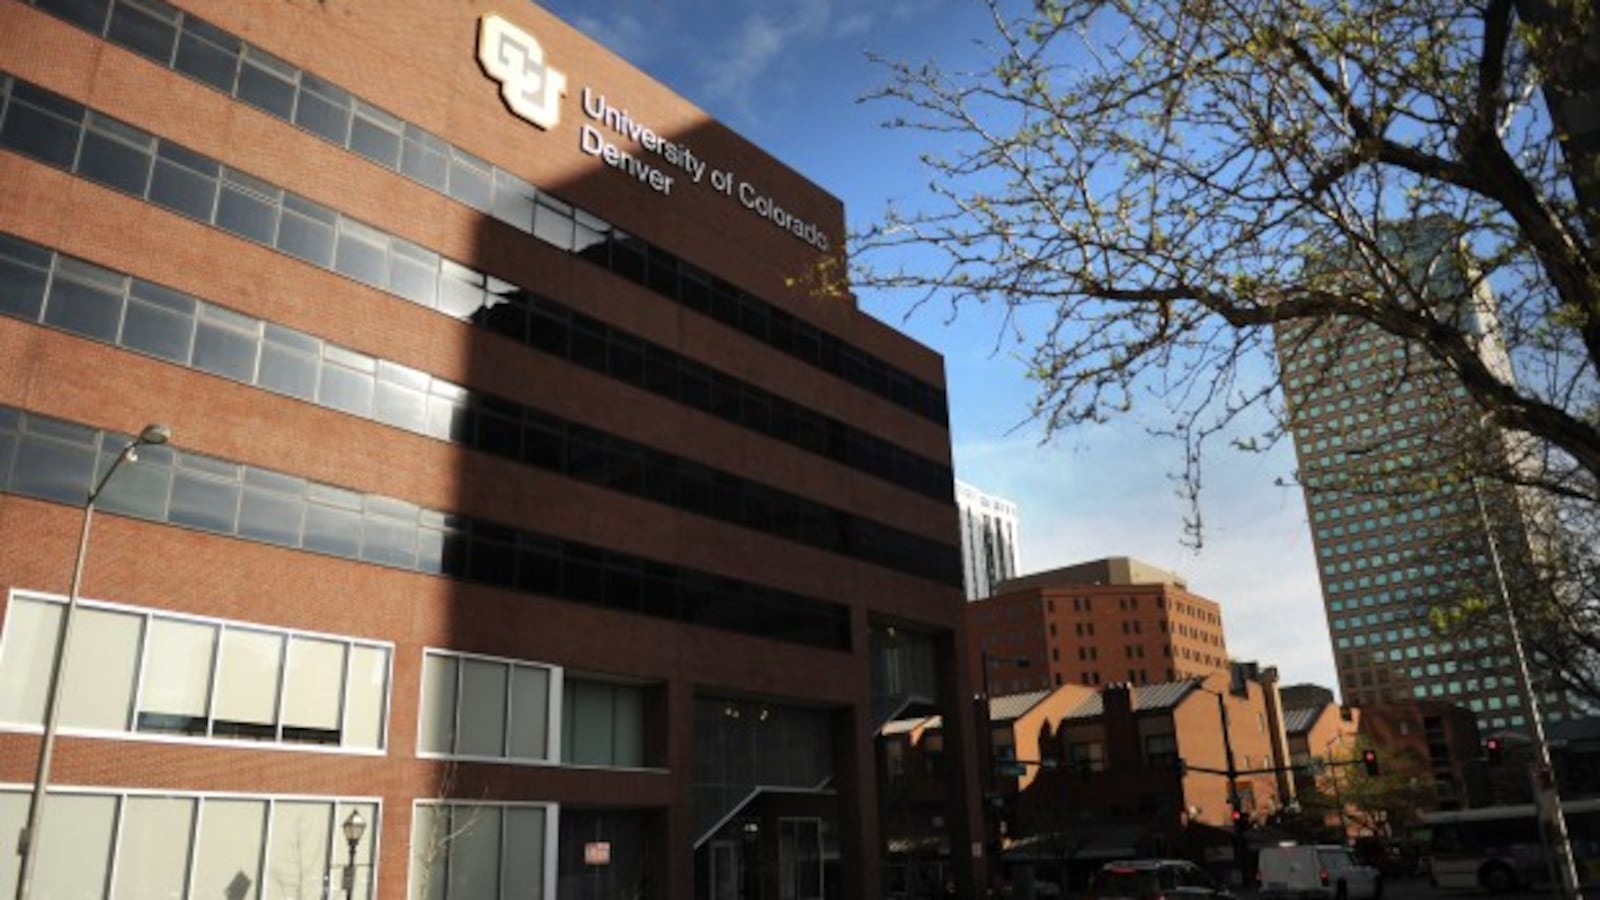 A brown building with windows at the University of Colorado Denver campus against the backdrop of other city buildings and a blue sky.